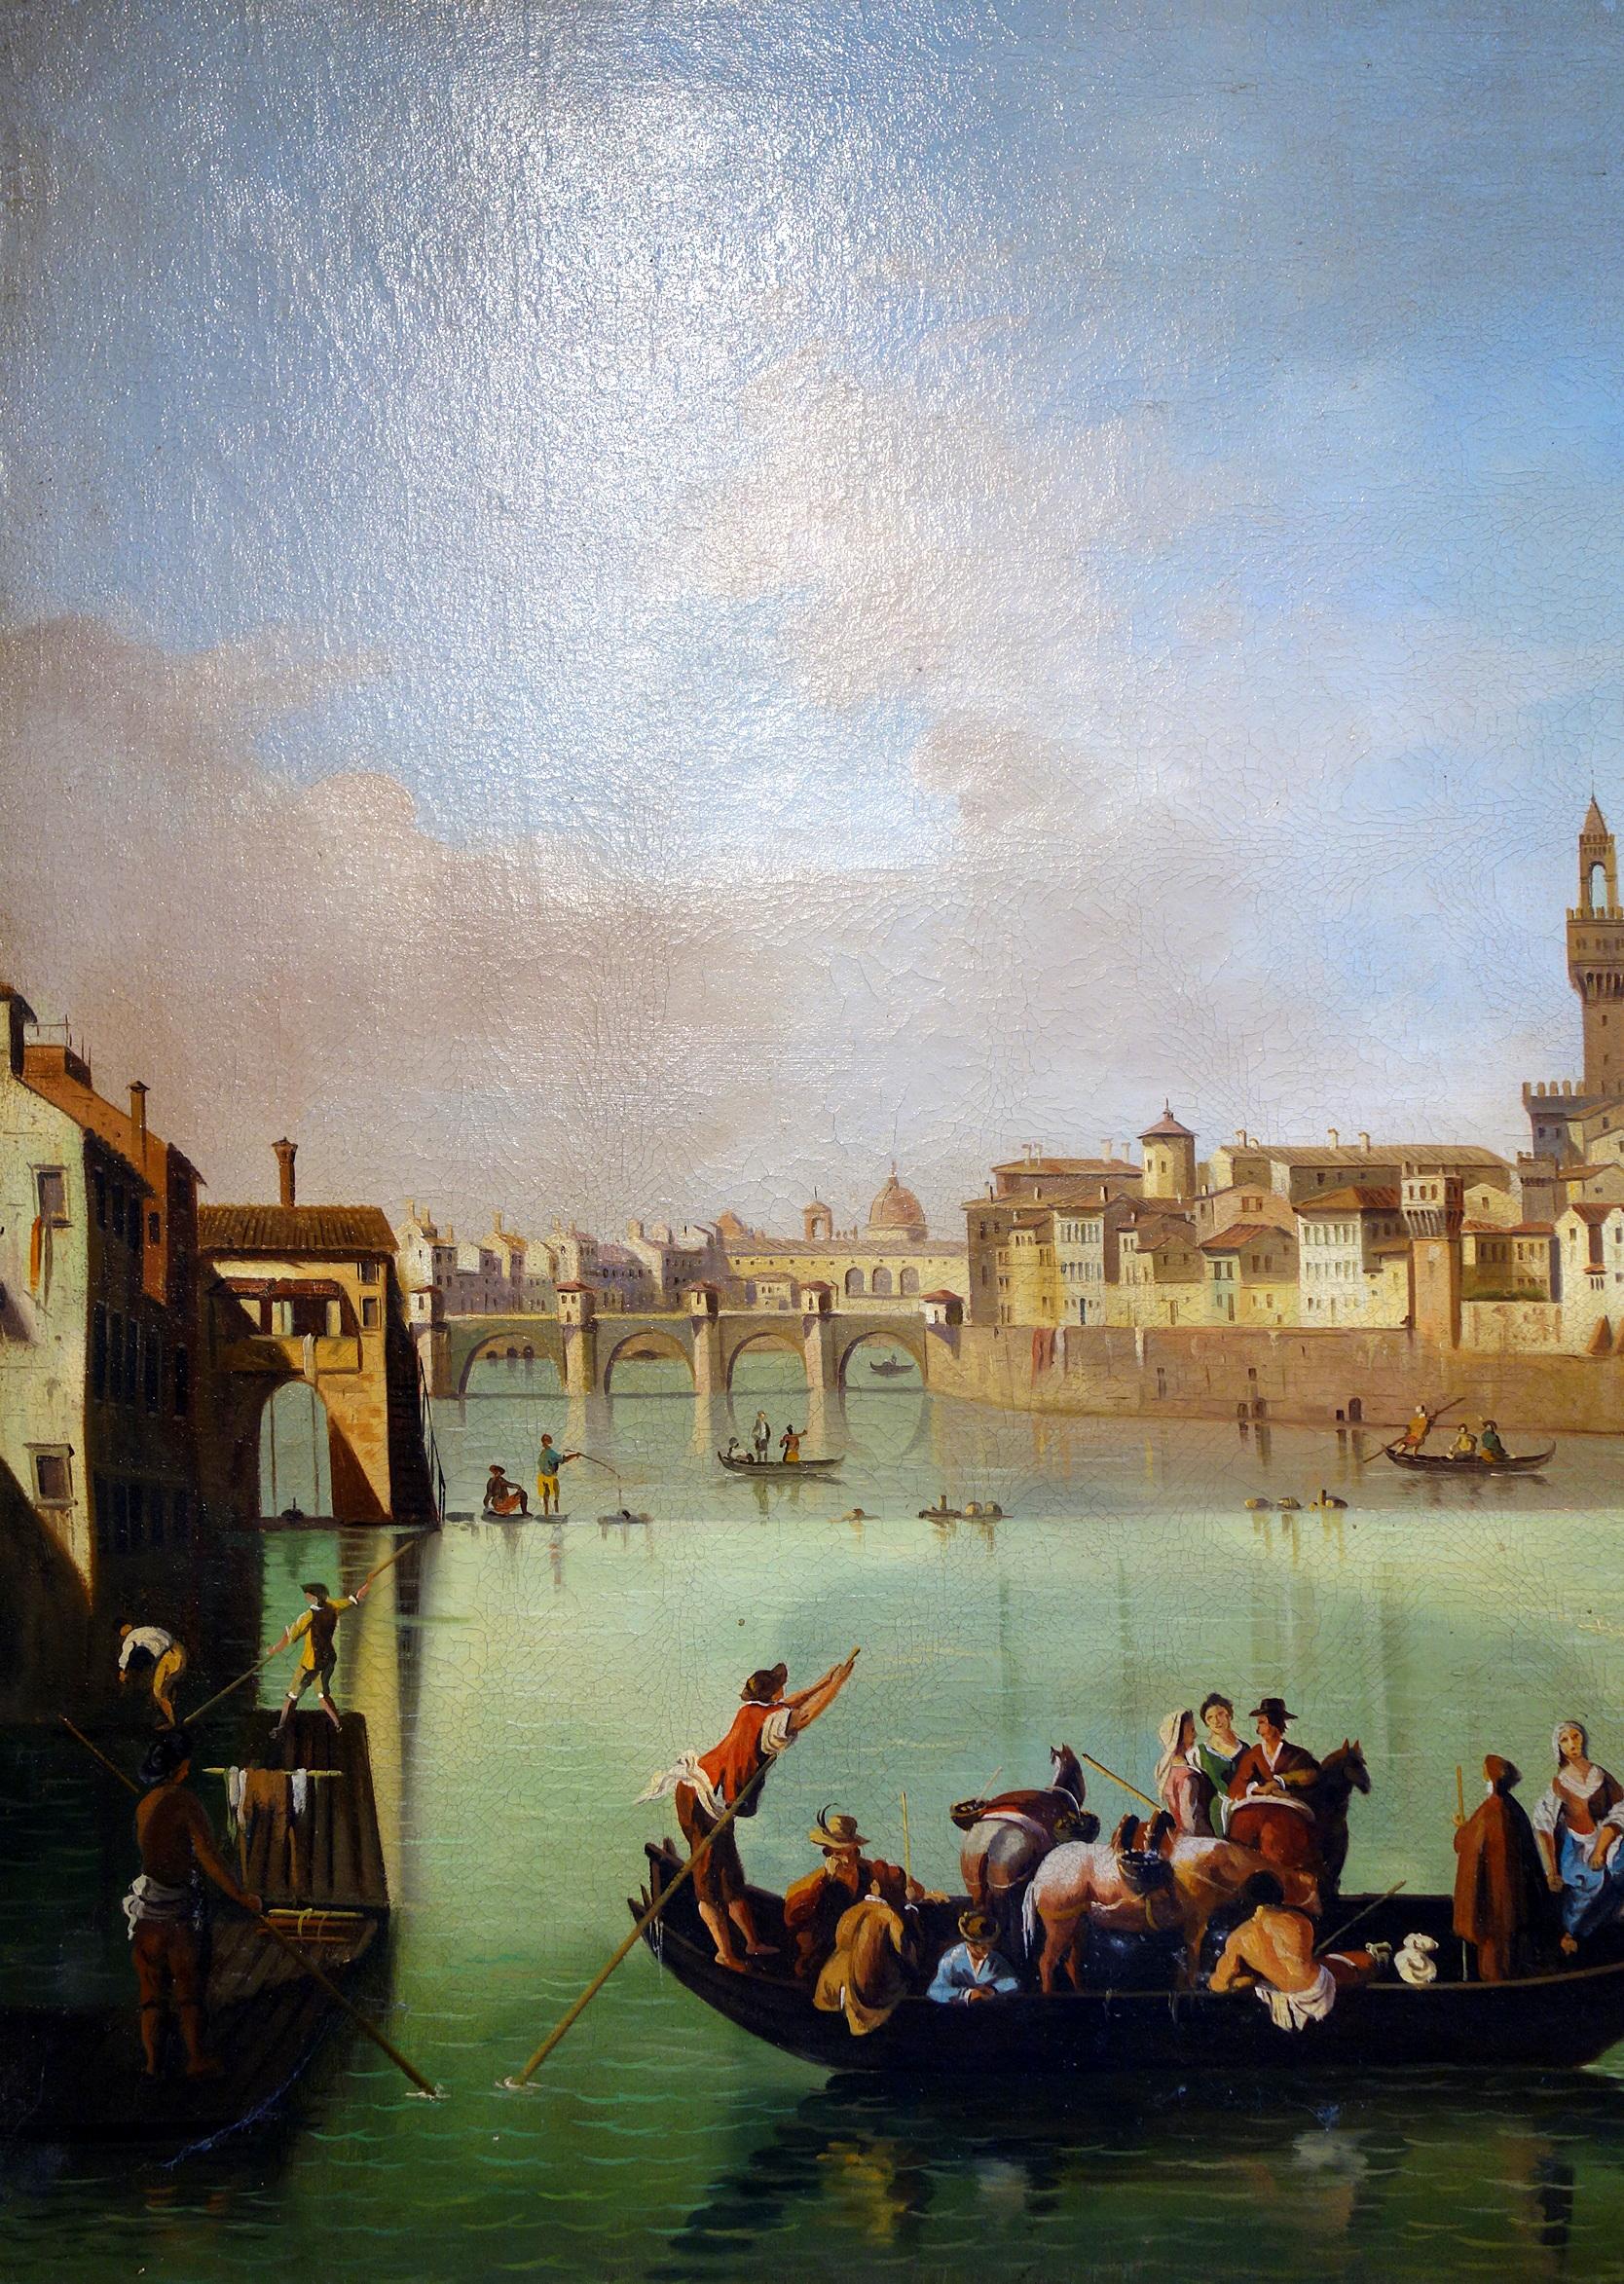 Late 19th century figural tempera painting on canvas. Nice architectural perspective along the Arno River in Florence, with gondolier patrons, the Ponte Vecchio, and Il Duomo rising from the distance. Soft greens and blues enliven the neutral